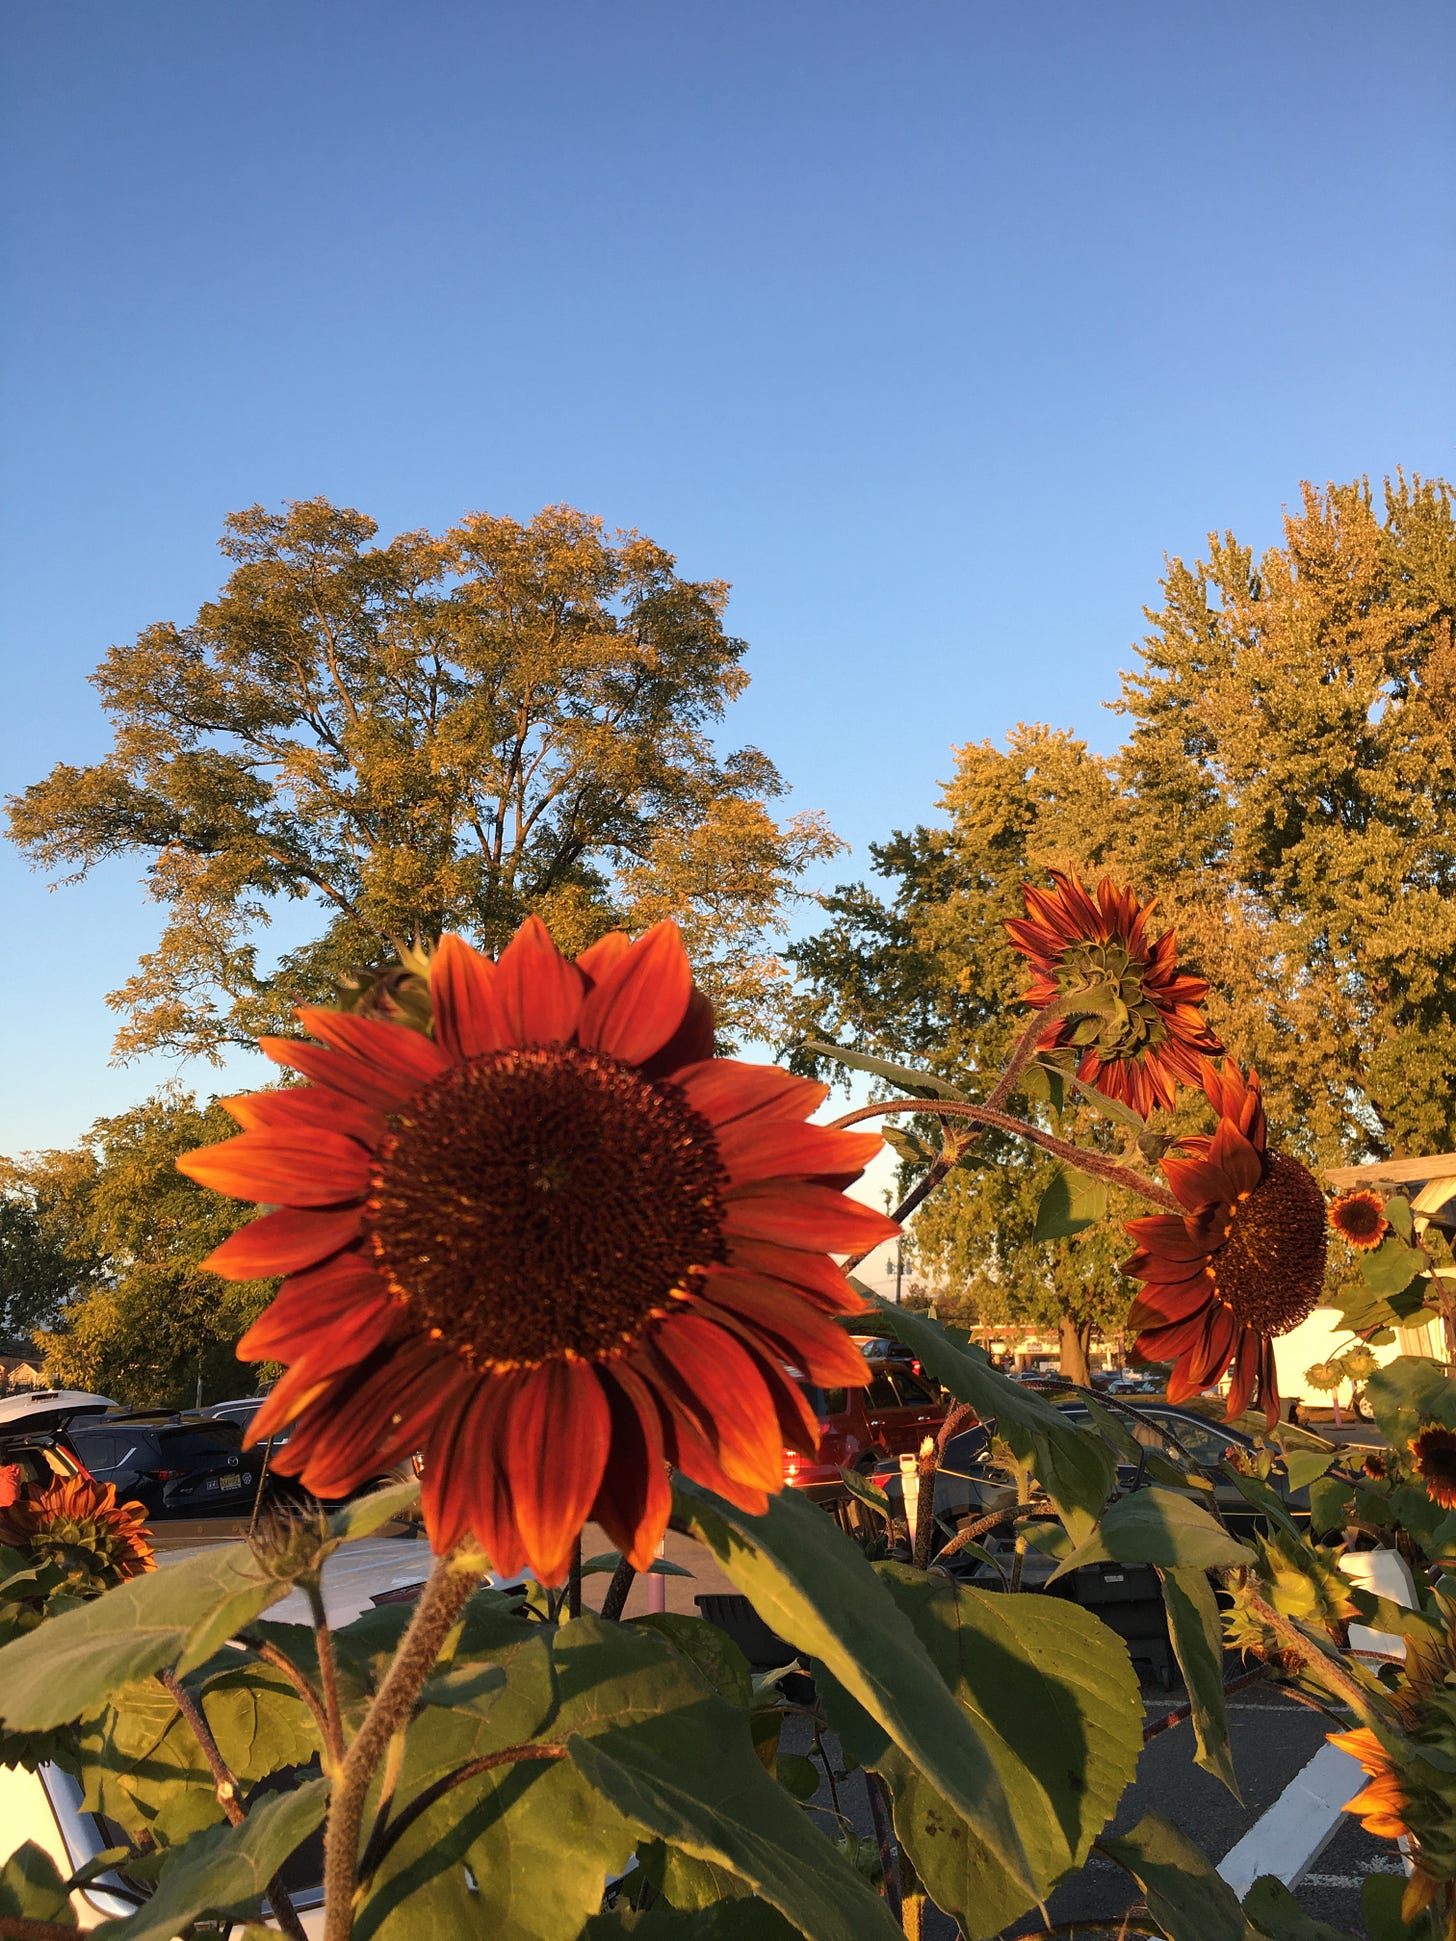 A bright orangy-red sunflower with green leaves is set against a clear blue fall sky.